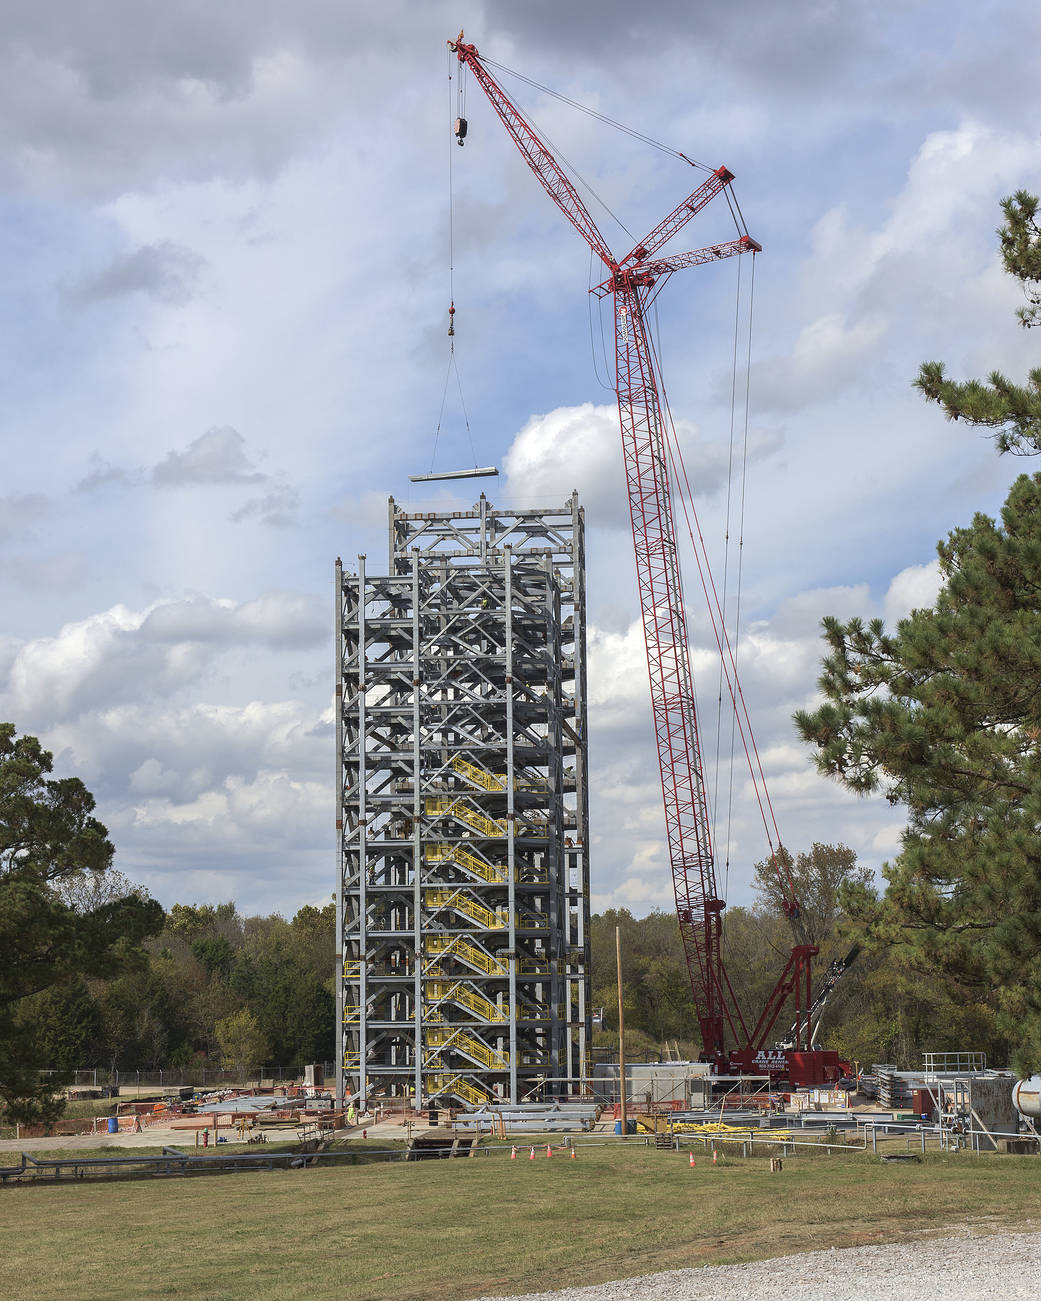 Steel is rising for two towers that will compose a 215-foot-tall structural test stand for NASA's Space Launch System.